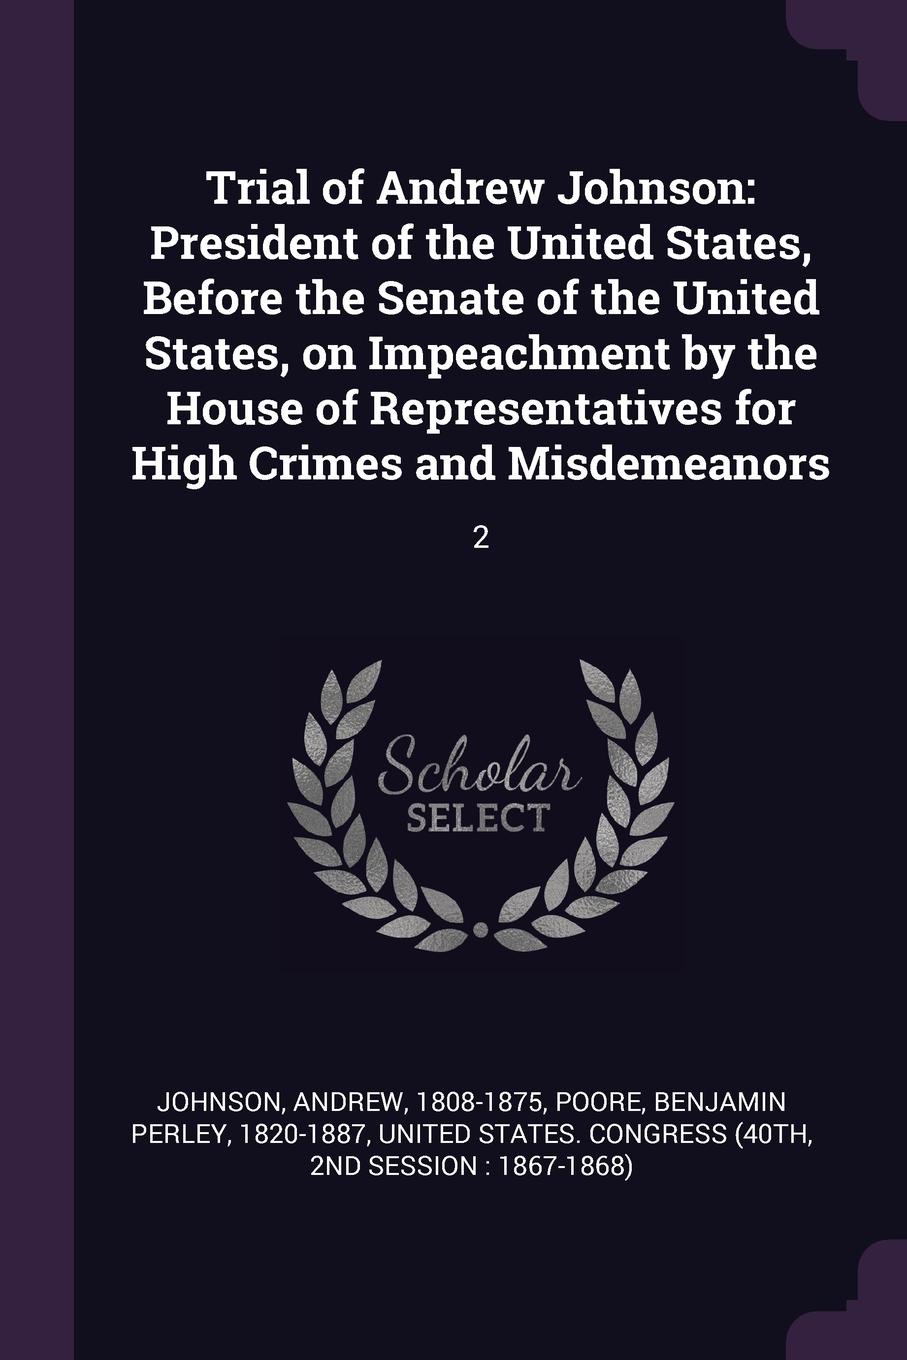 Trial of Andrew Johnson. President of the United States, Before the Senate of the United States, on Impeachment by the House of Representatives for High Crimes and Misdemeanors: 2